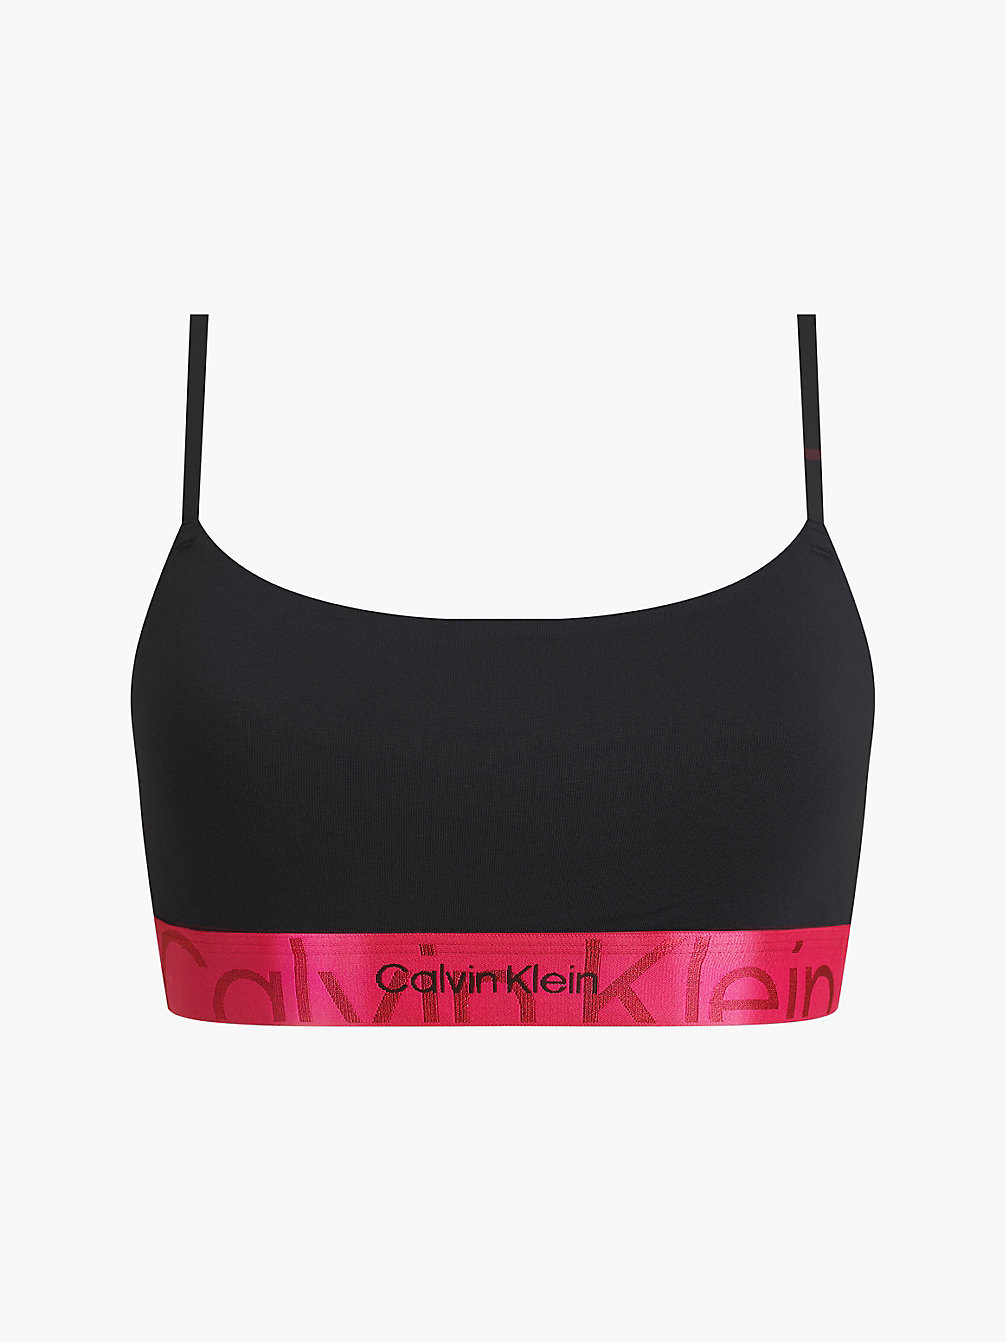 Corpiño - Embossed Icon > BLACK W. PINK SPLENDOR > undefined mujer > Calvin Klein